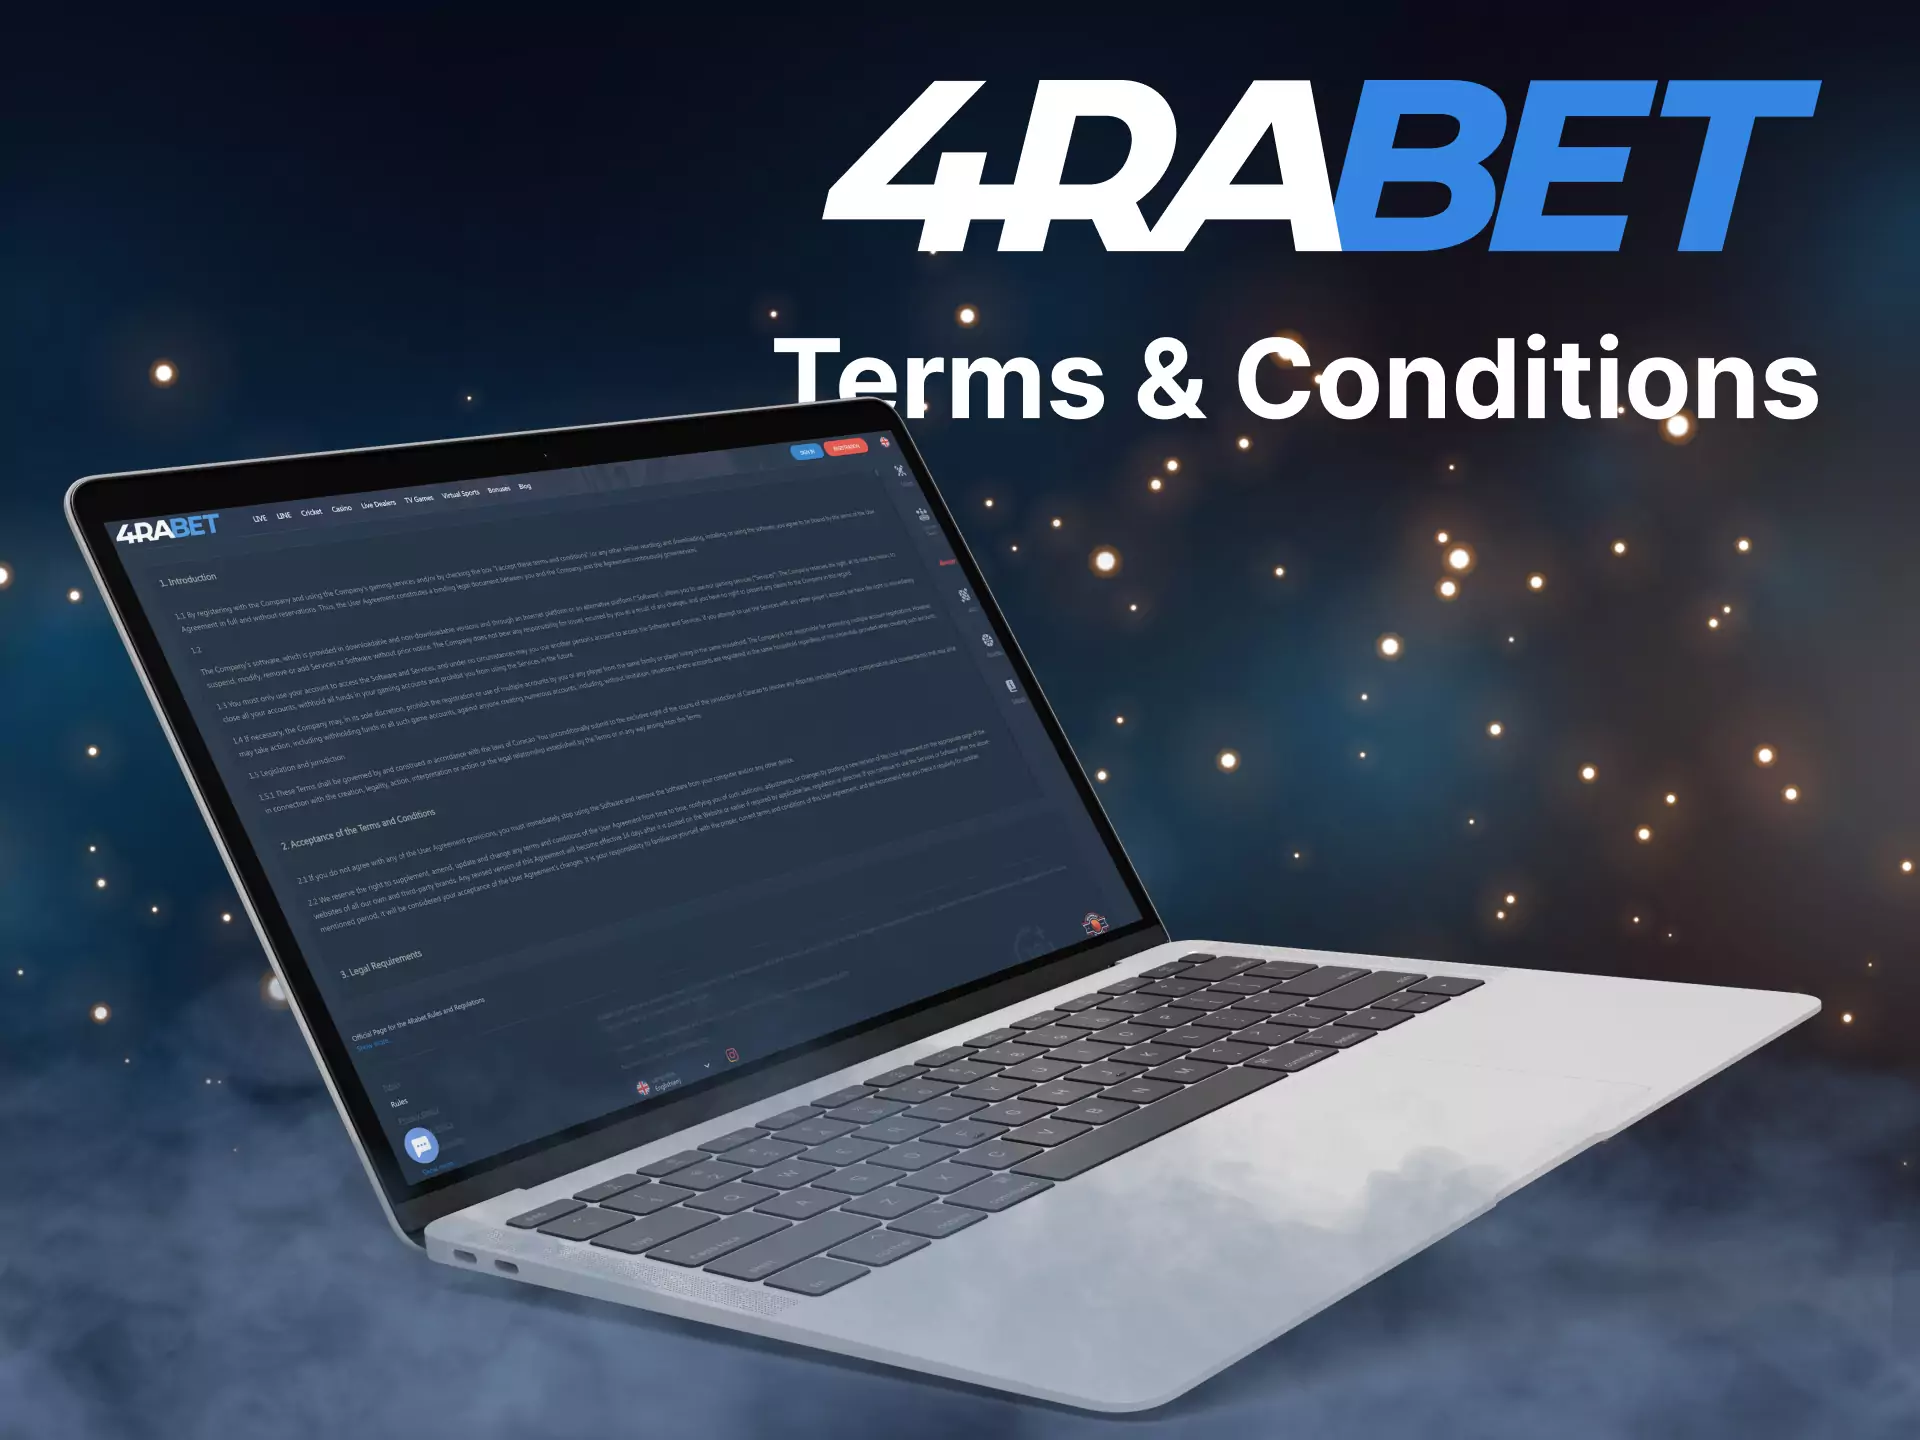 4rabet uses certain terms and conditions, read them to better understand all the processes.